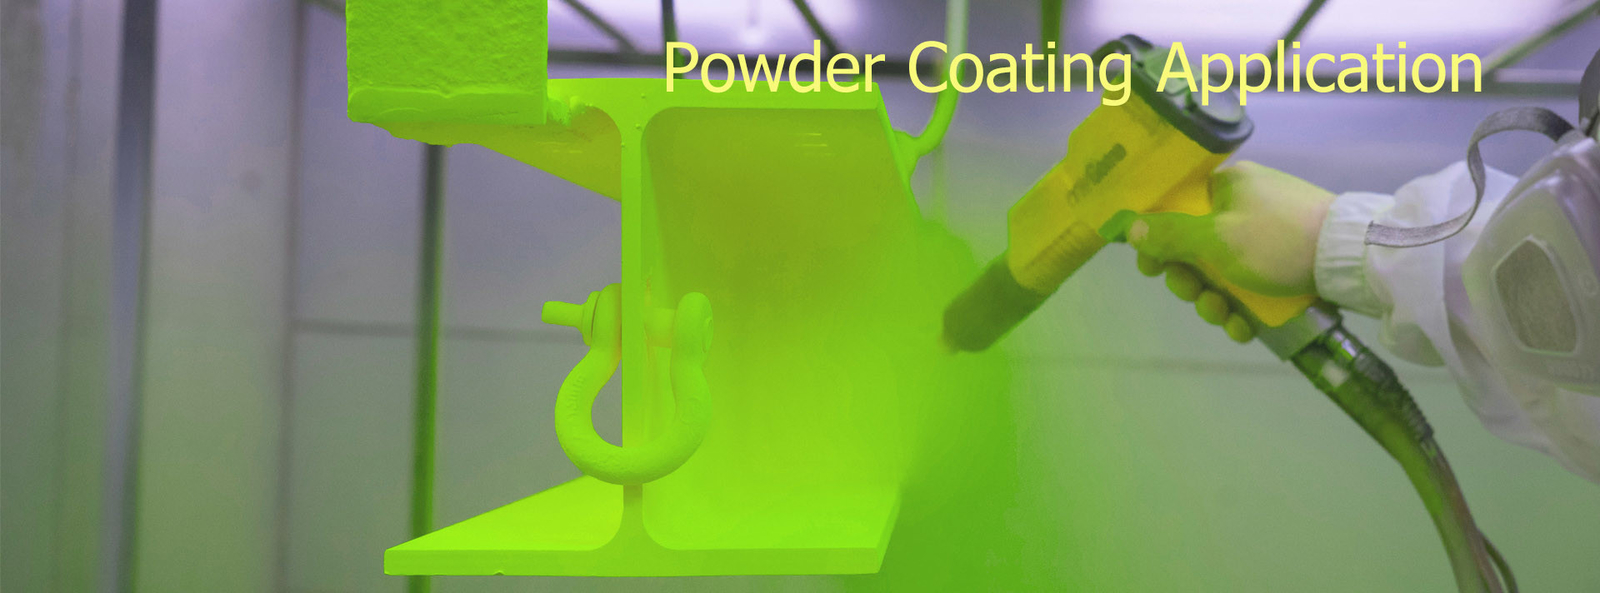 quality Thermoset Powder Coating factory